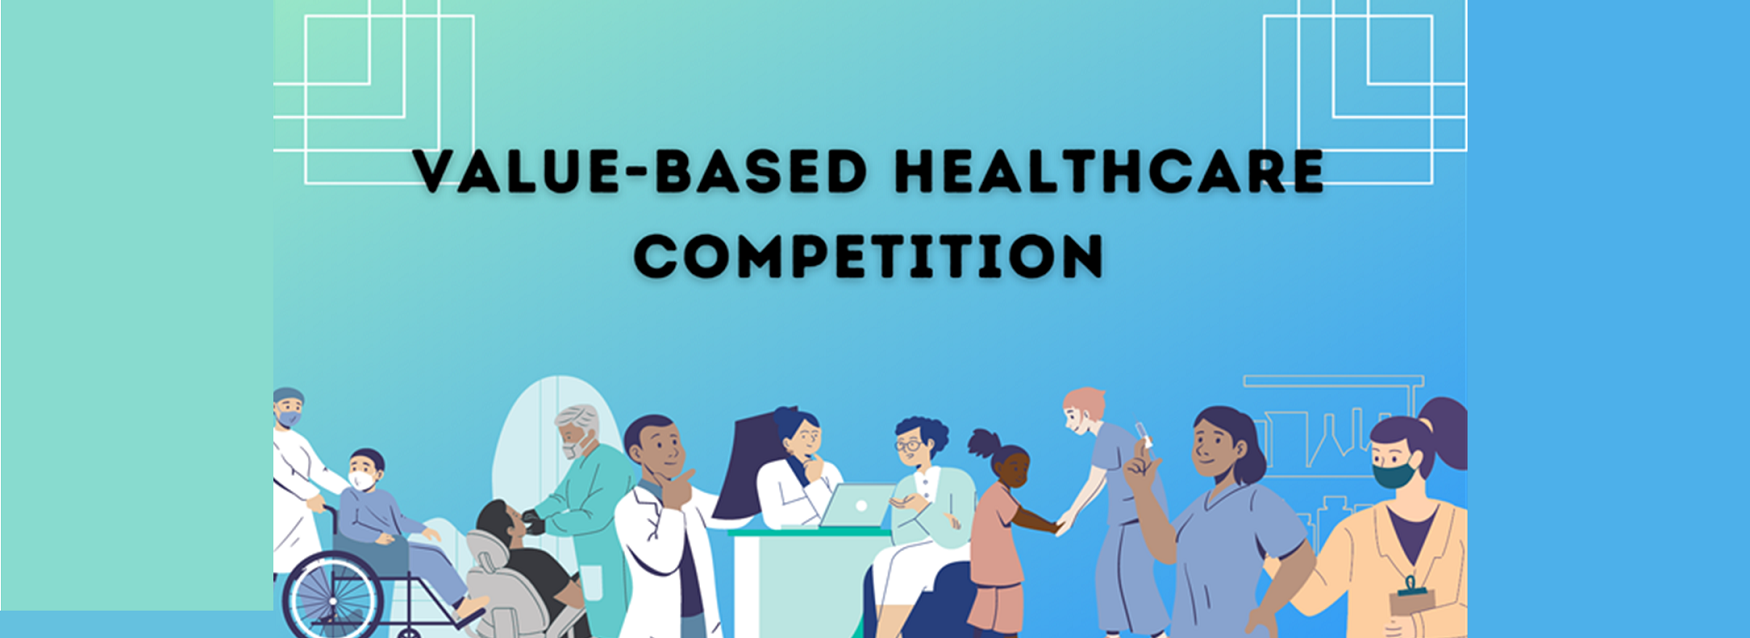 Value-based healthcare competition text with images of those in the healthcare/medical/dental/nursing field.